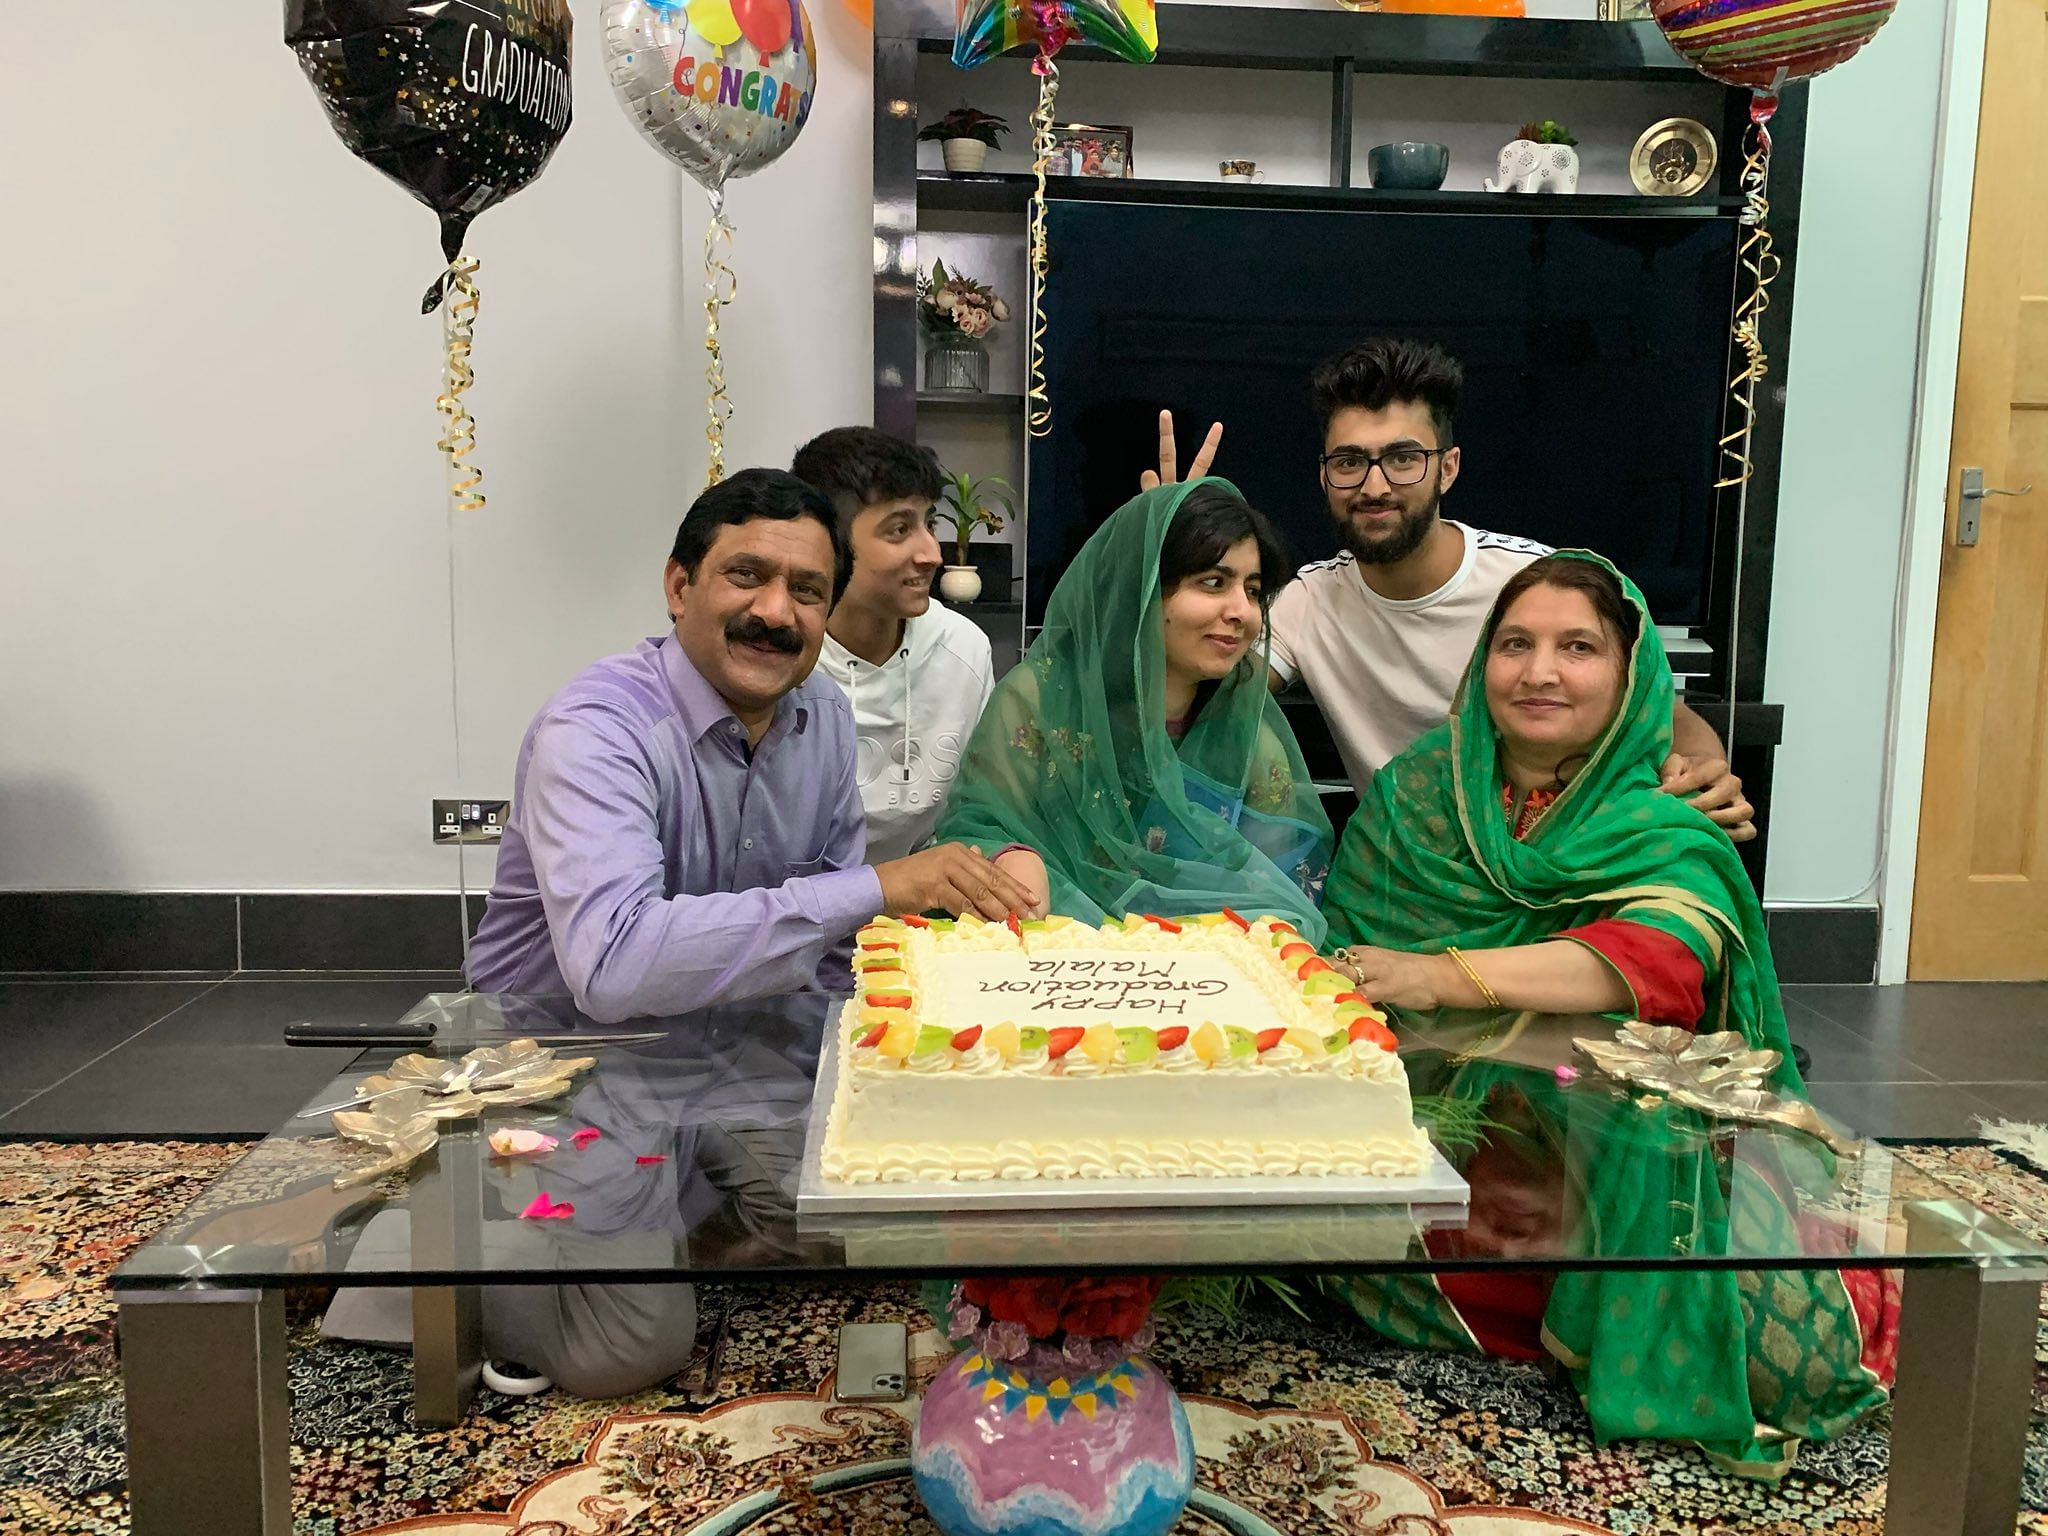 Malala, 22, who attended Oxford's Lady Margaret Hall college, took to Twitter to share two pictures that show her celebrating the milestone with her family. Credit/Twitter (Malala)